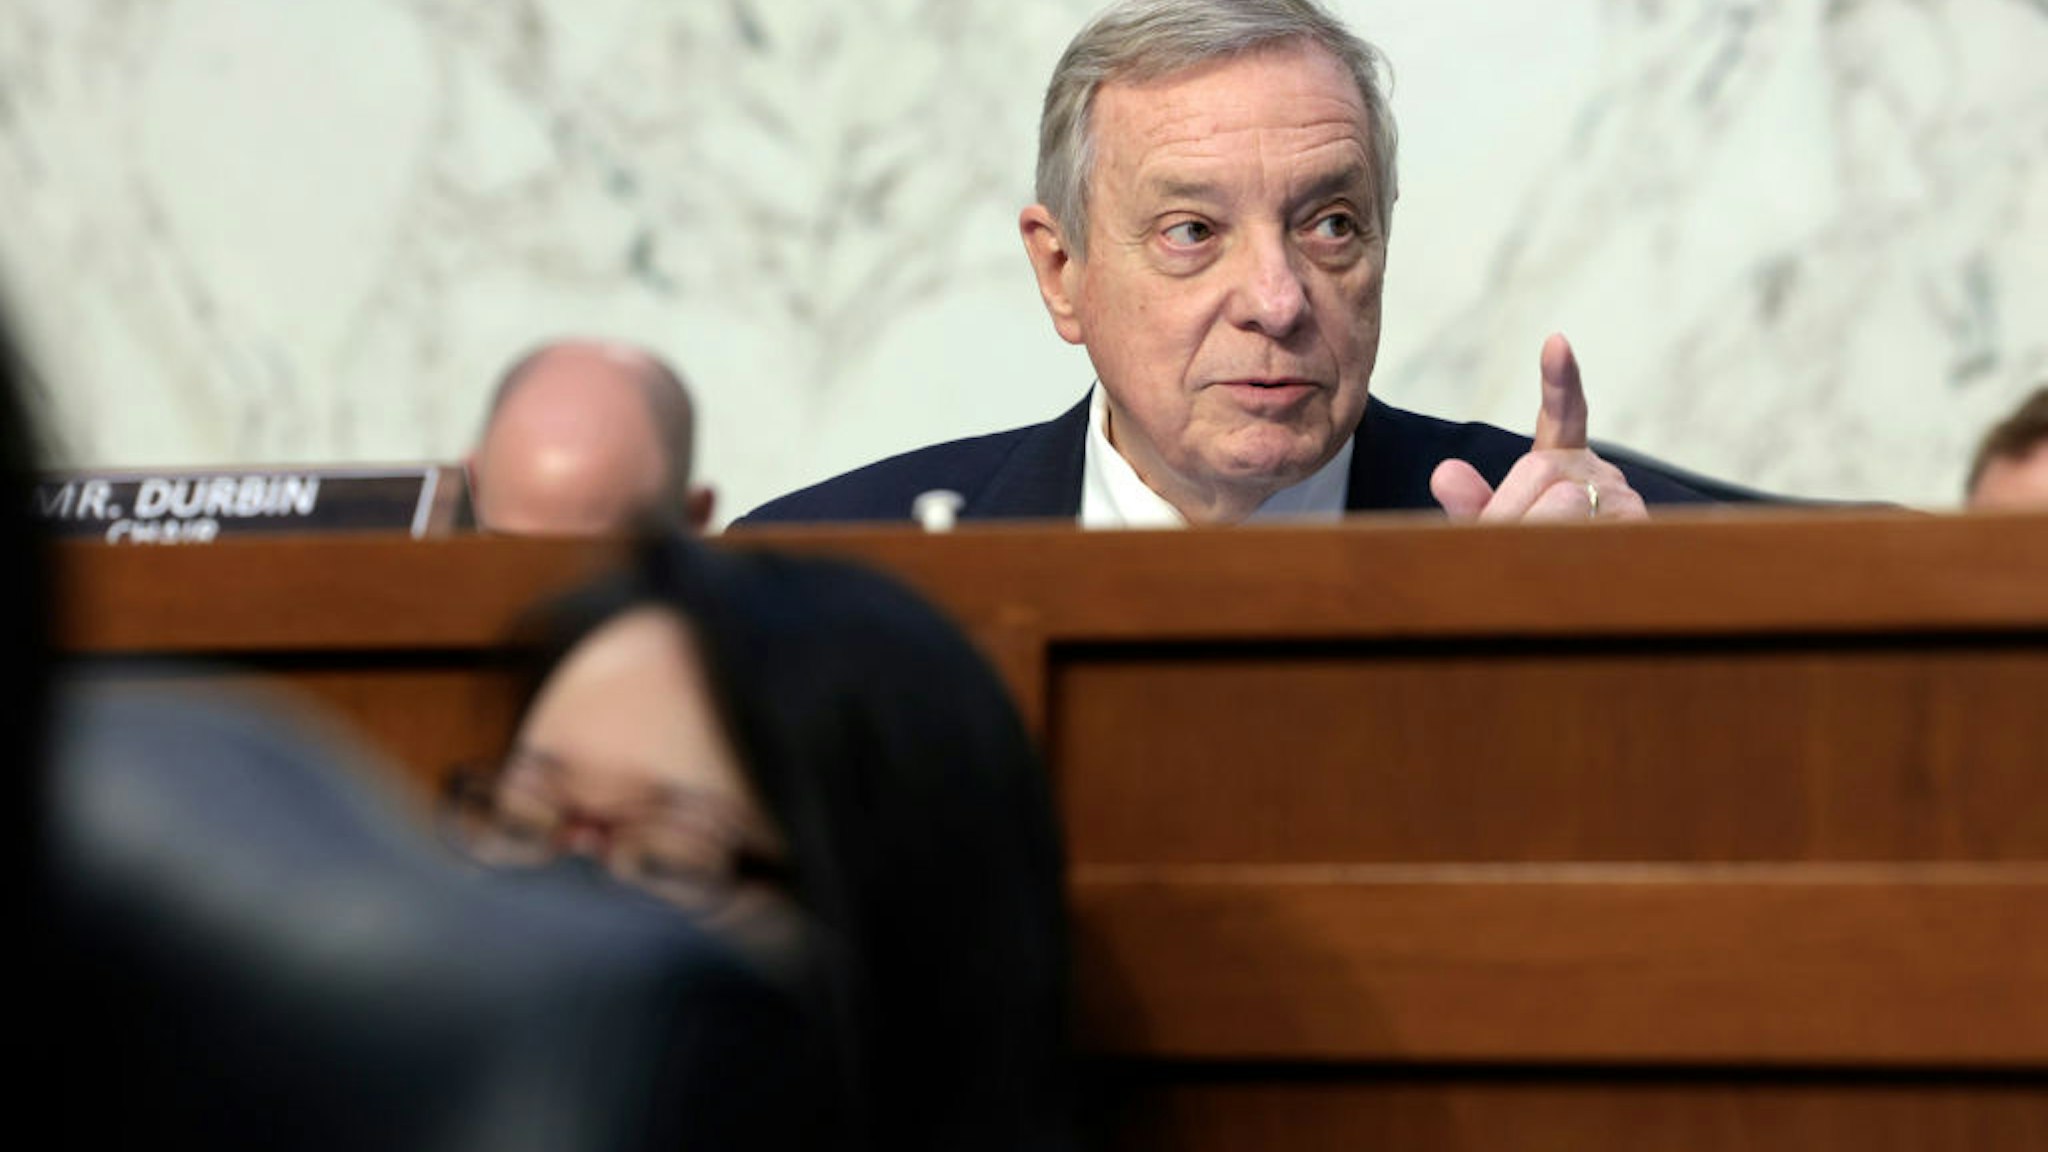 WASHINGTON, DC - APRIL 4: Committee chairman Sen. Dick Durbin (D-IL) listens during a Senate Judiciary Committee business meeting to vote on Supreme Court nominee Judge Ketanji Brown Jackson on Capitol Hill, April 4, 2022 in Washington, DC. A confirmation vote from the full Senate will come later this week. (Photo by Anna Moneymaker/Getty Images).